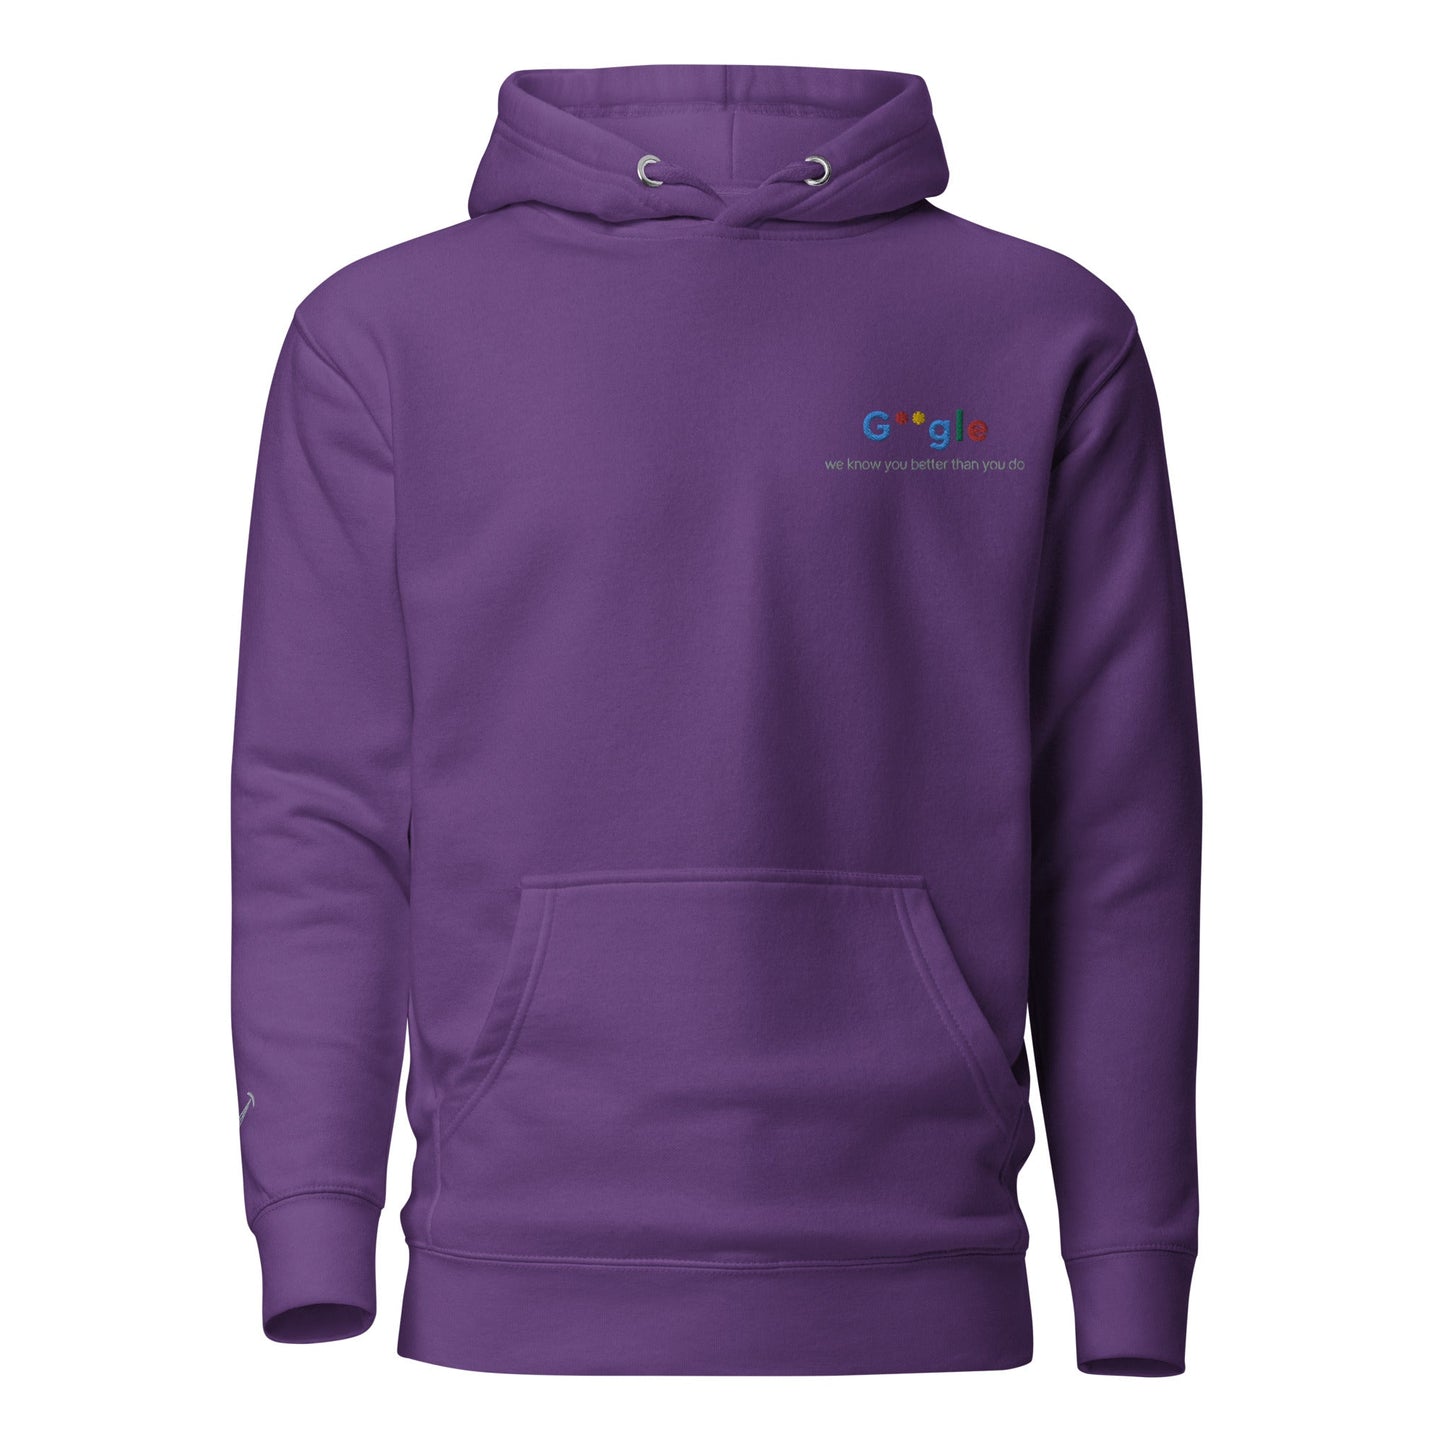 Go*gle Embroidered Unisex Hoodie - chucklecouture co.